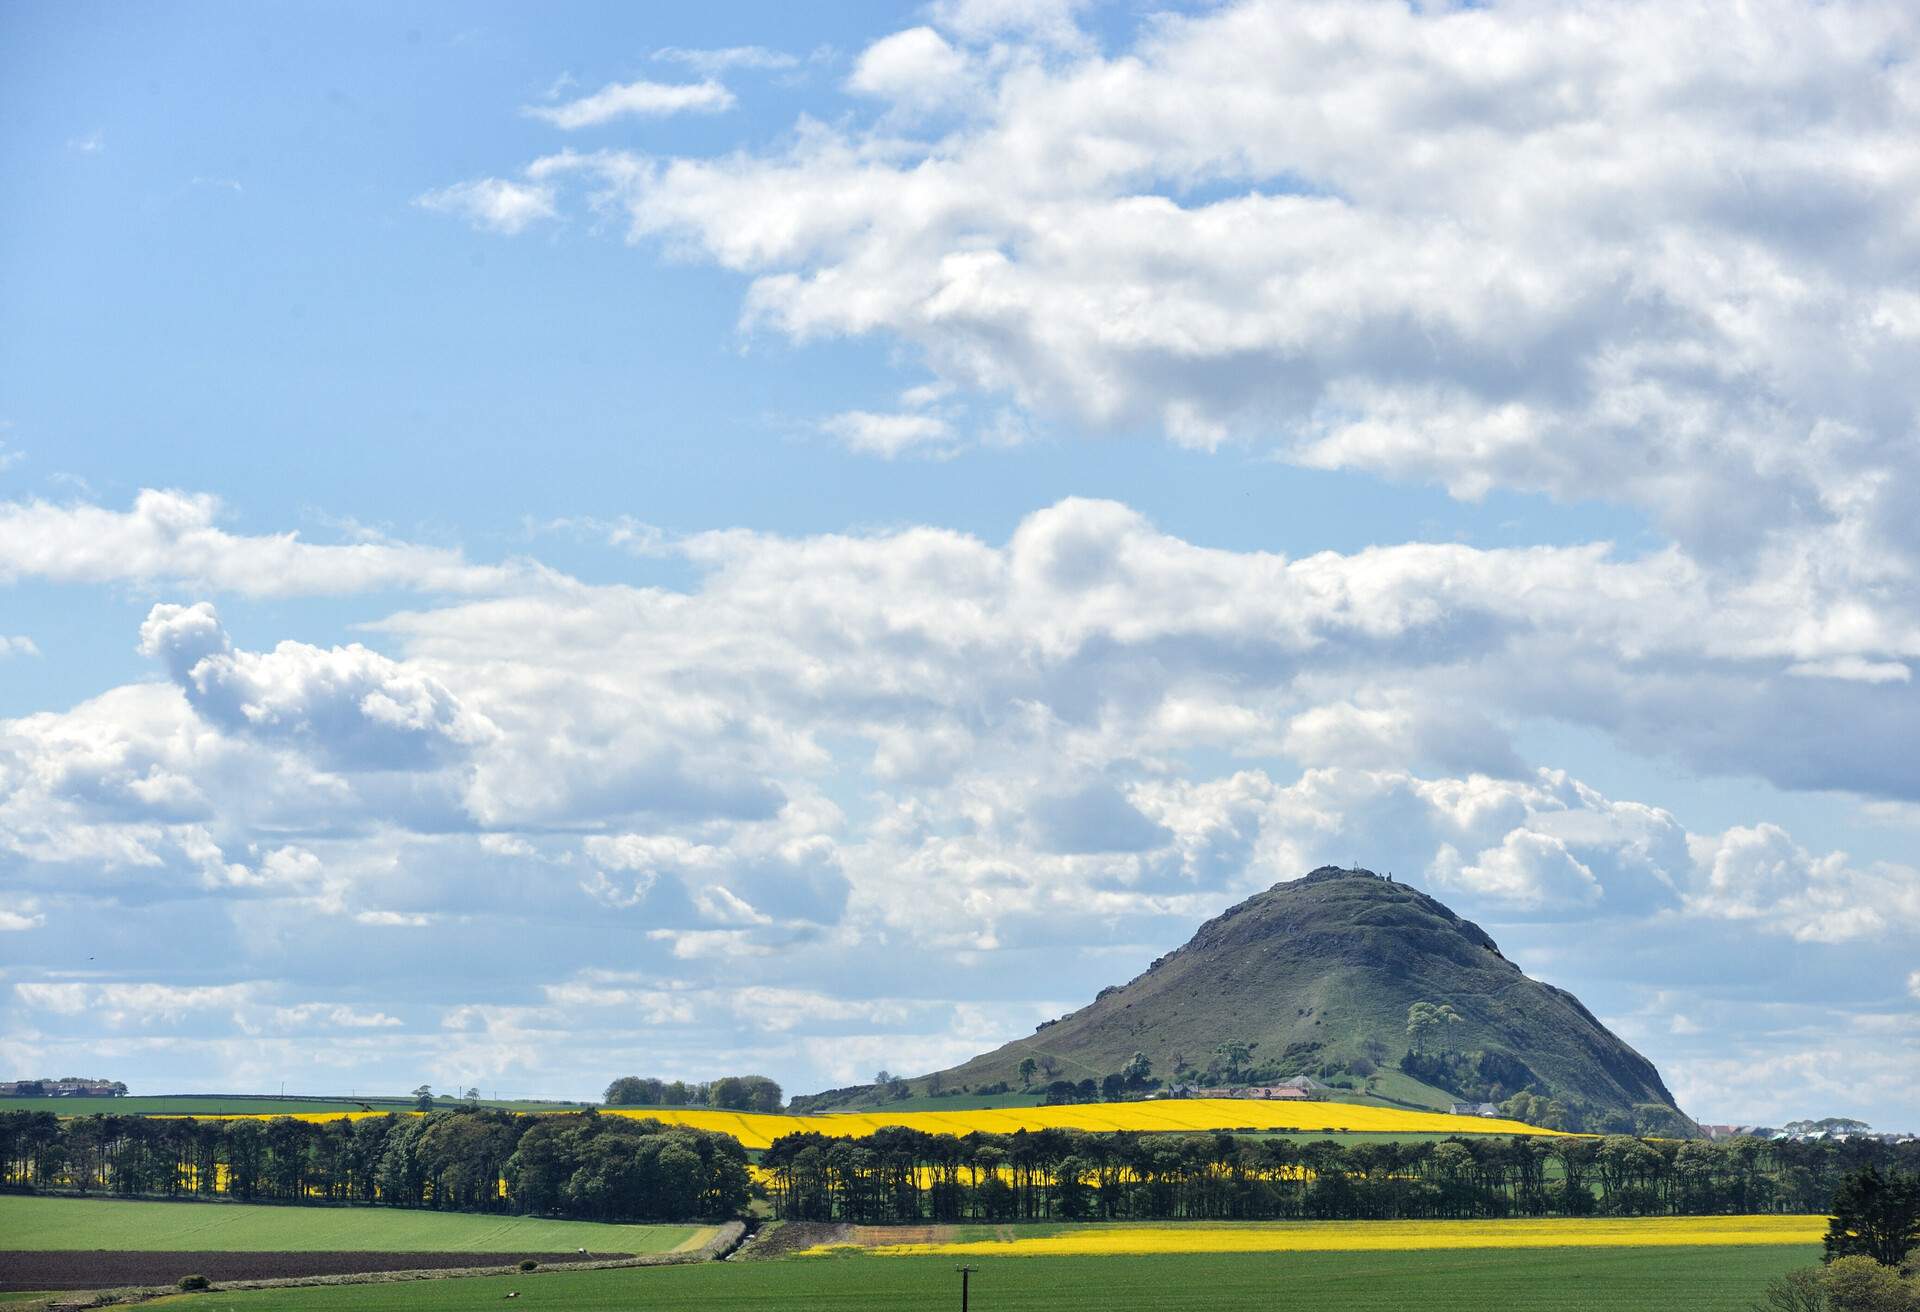 A mountain overlooks a field of lush trees and a wide farmland of bright yellow flowering plant.